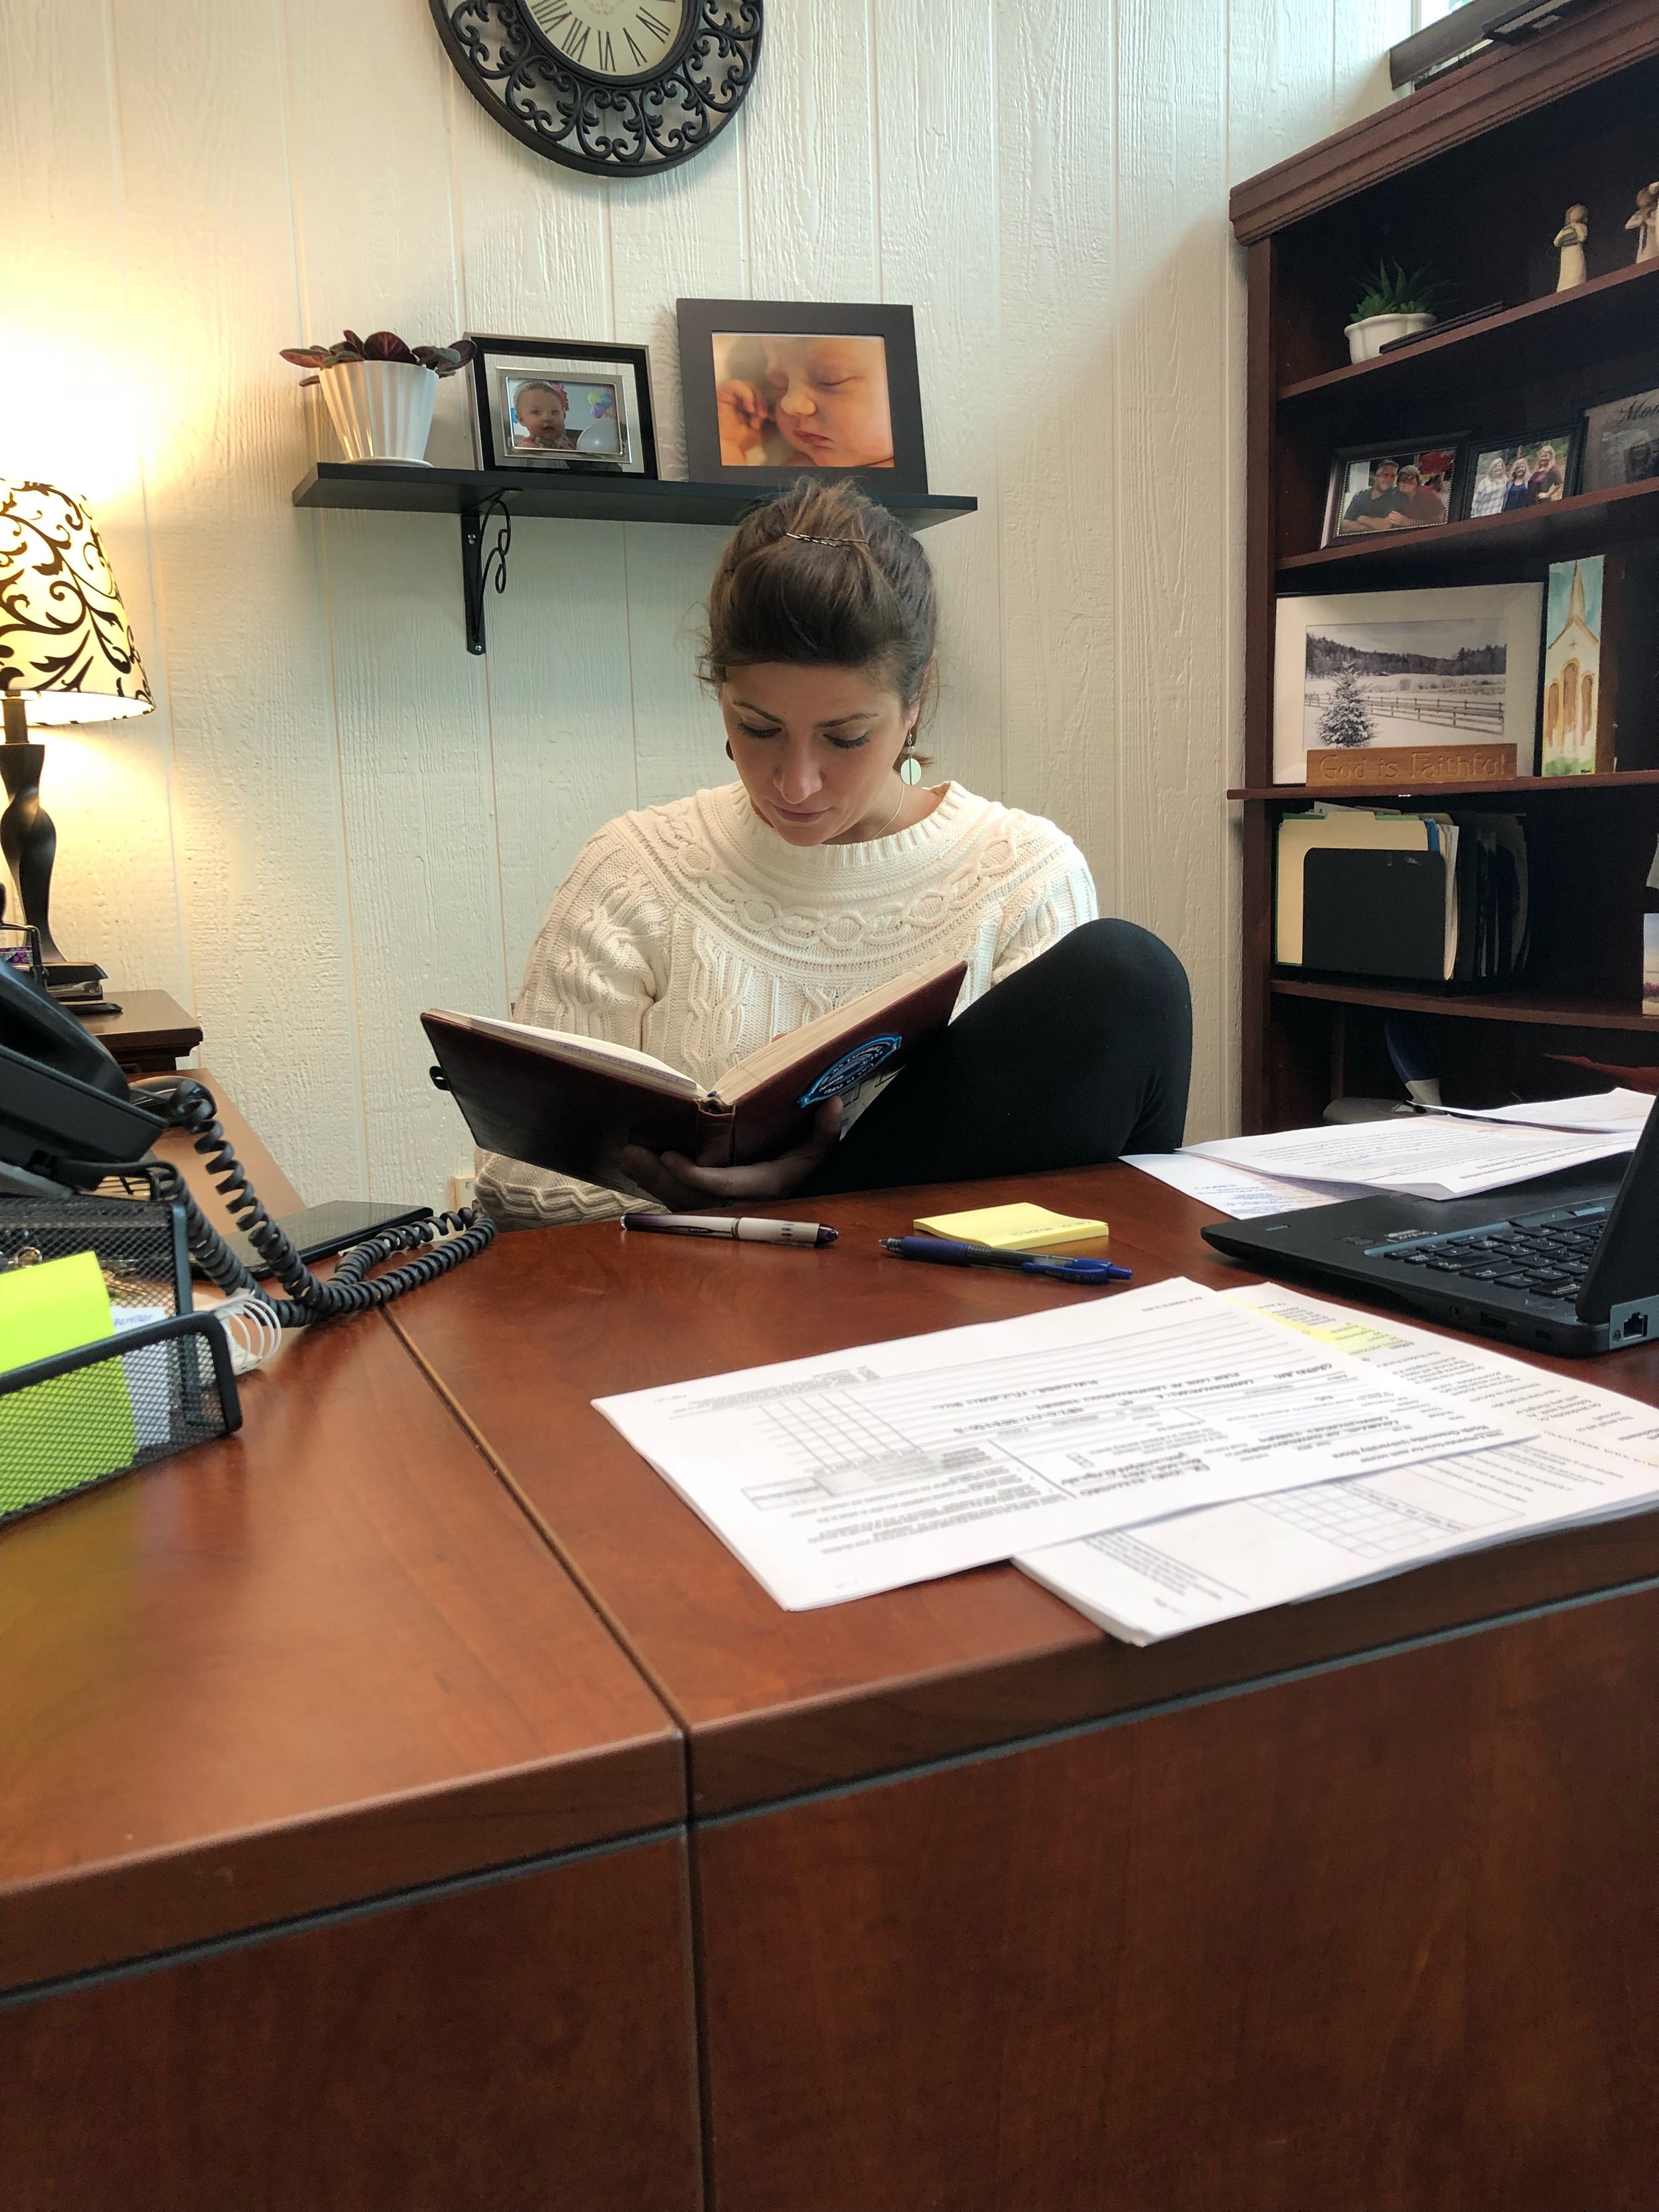 Lydia Rodgers reviews her schedule sitting at her desk.